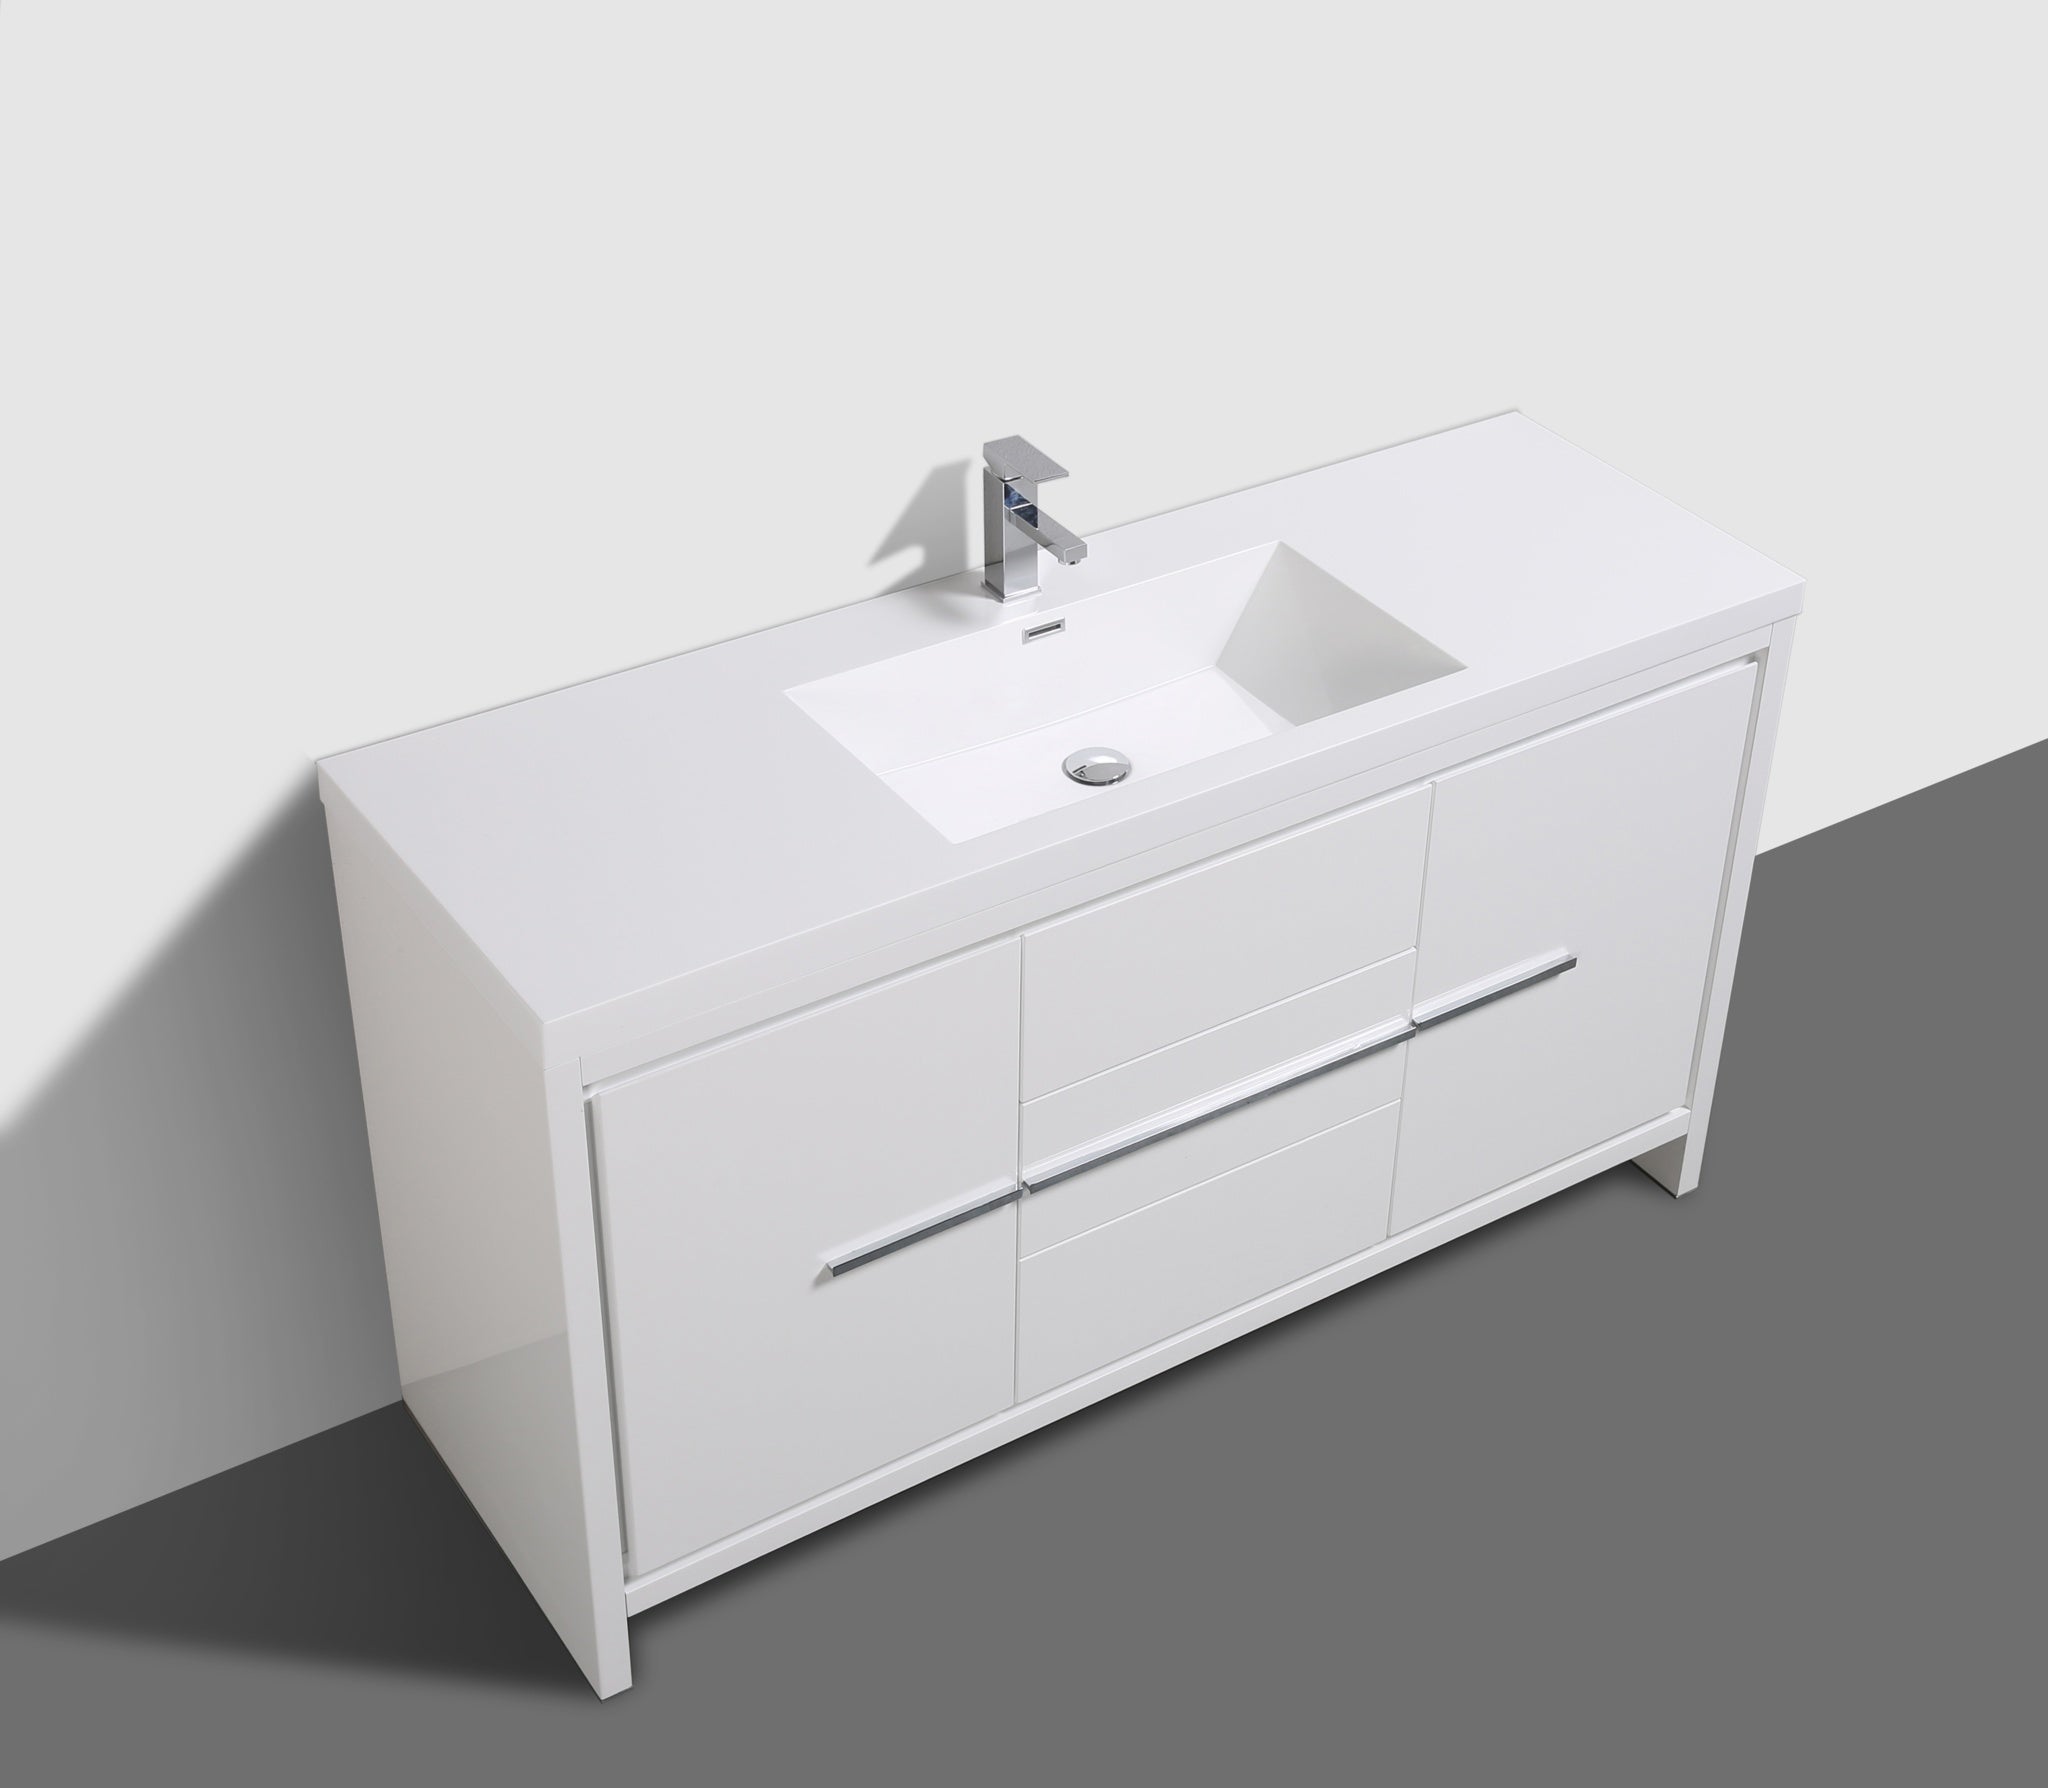 Granada 59 White High Gloss With Chrome Handle Cabinet, Square Cultured Marble Single Sink, Free Standing Modern Vanity Set